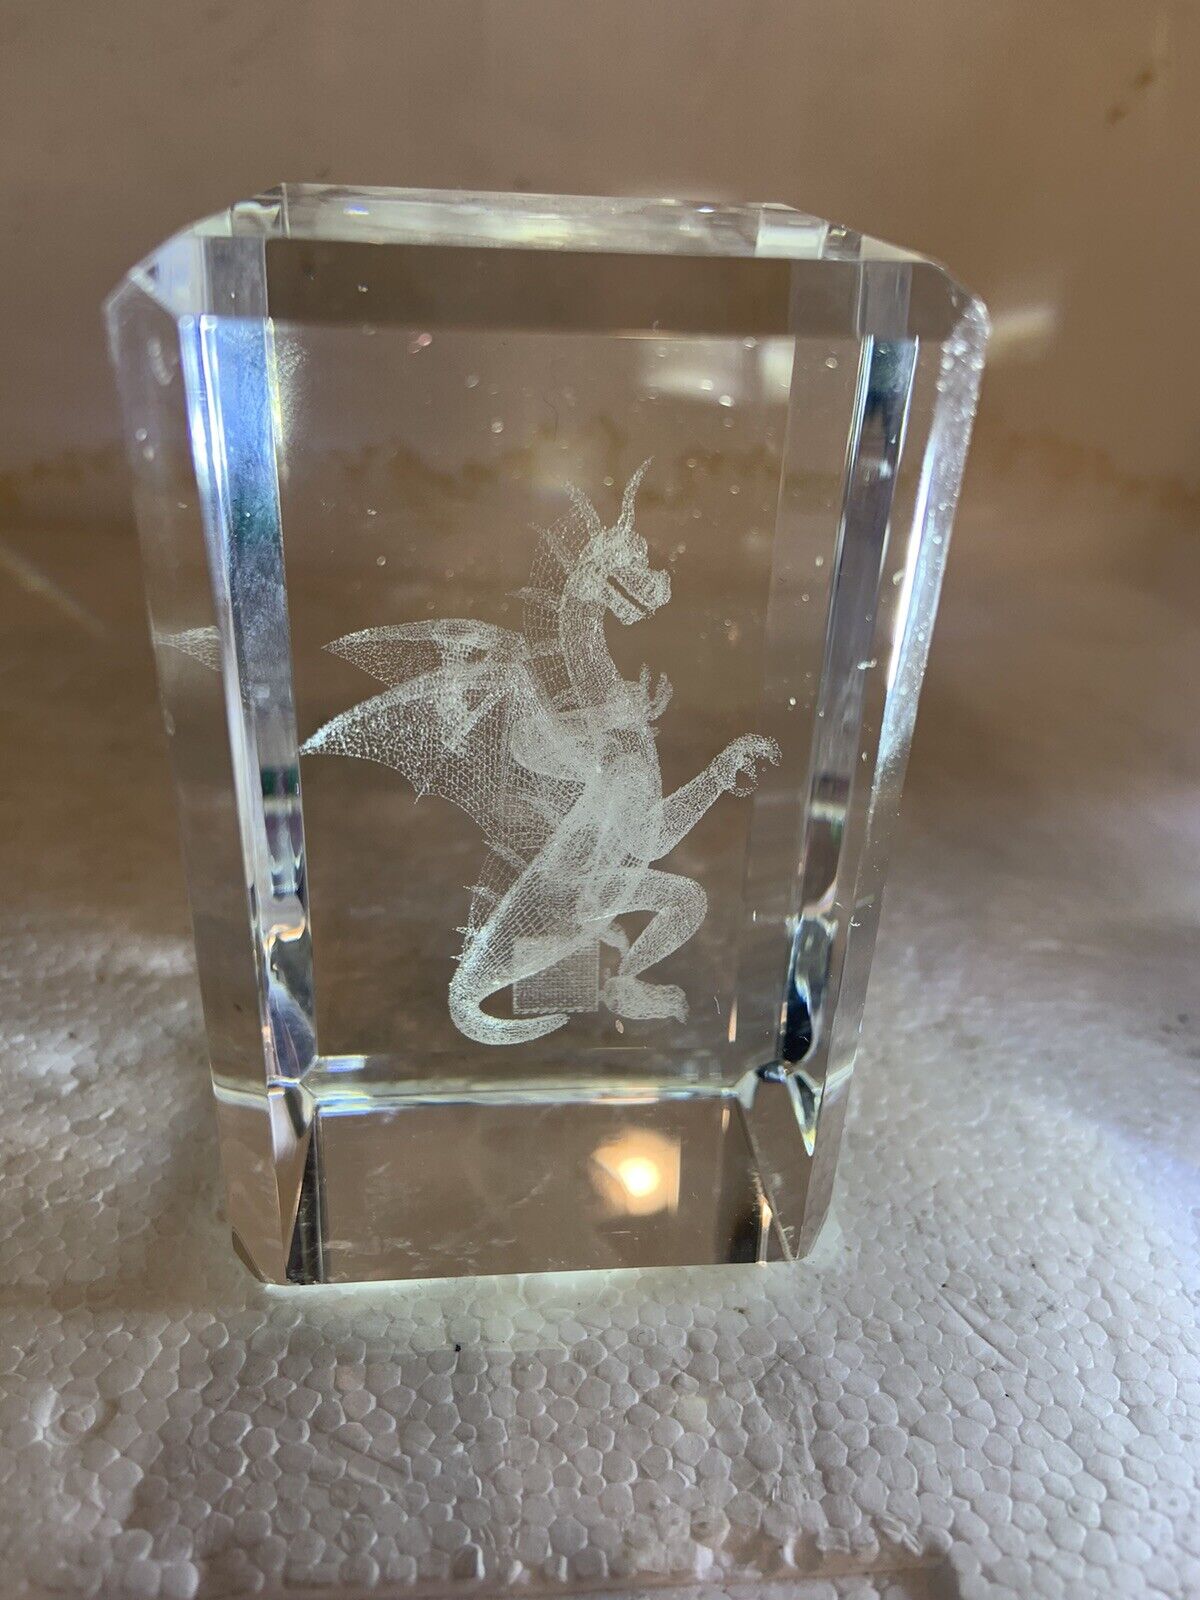 Vntg Dragon 3D Laser Etched Cube Paperweight 3.5” Tall RARE See All Photos NICE